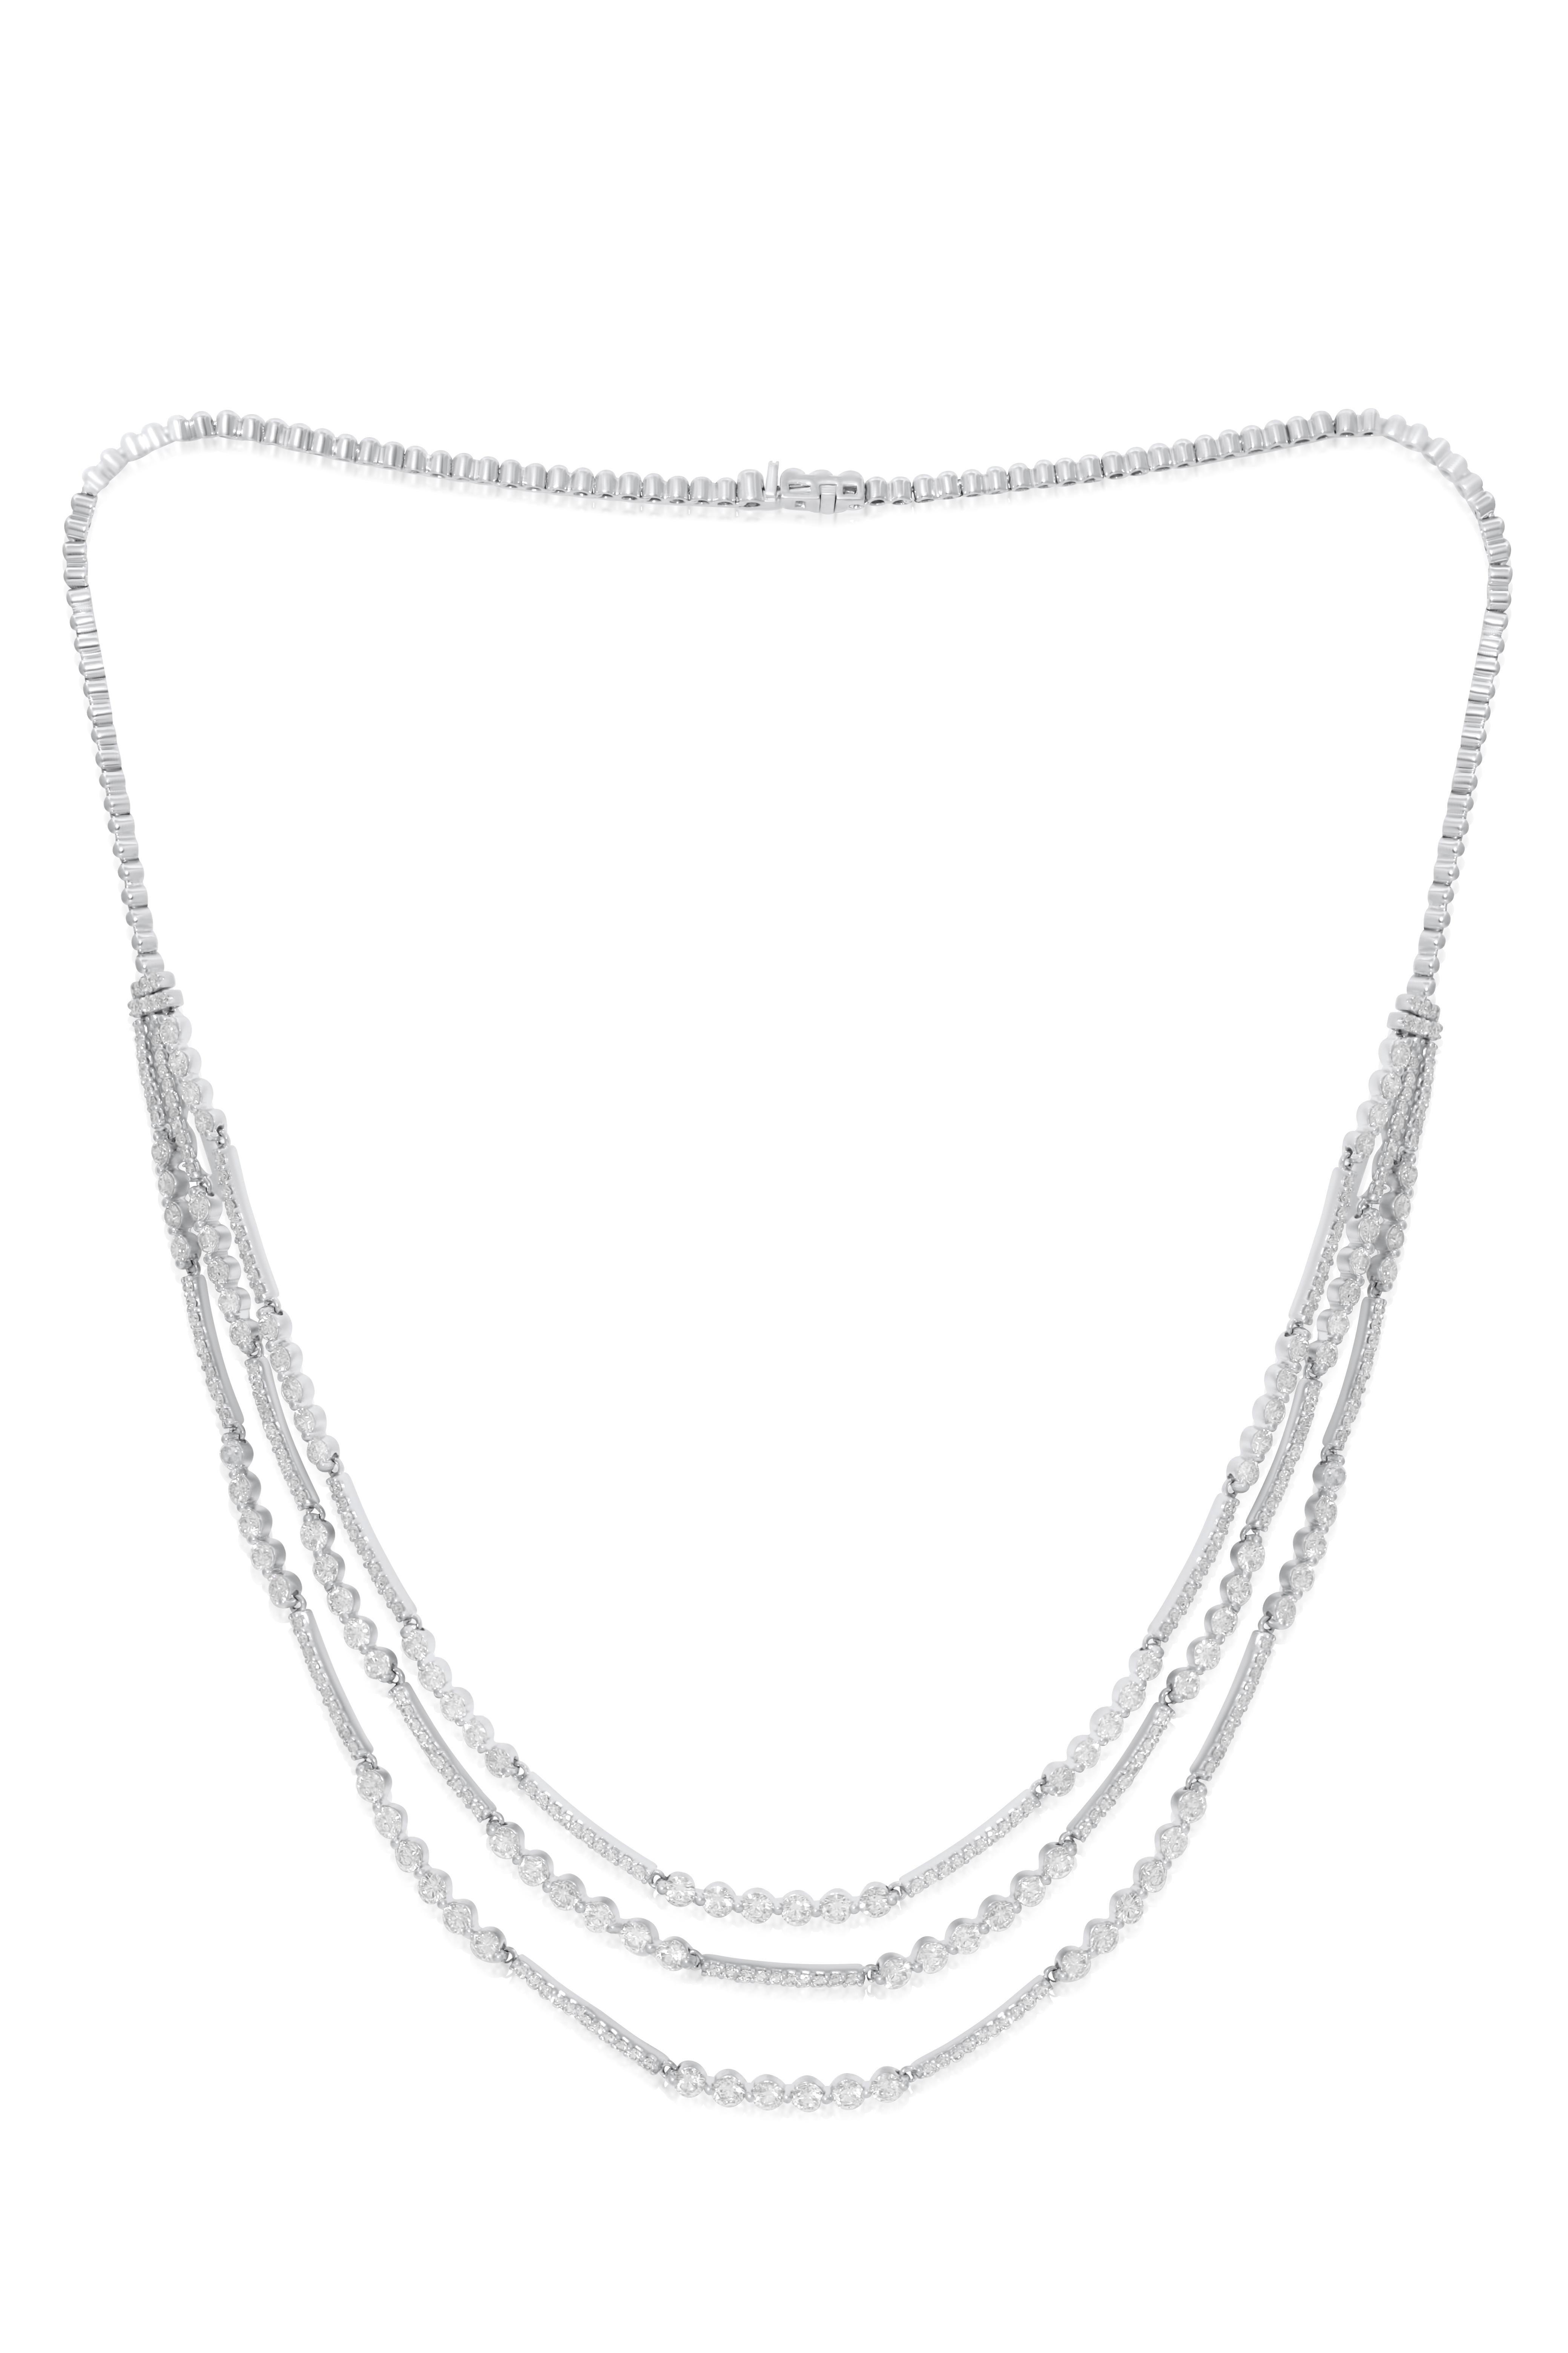 18K White Gold Diamond Layered Necklace, features 9.75 Carats of Diamonds. All diamond are G-H in Color SI in Clarity Ideal cut 
16